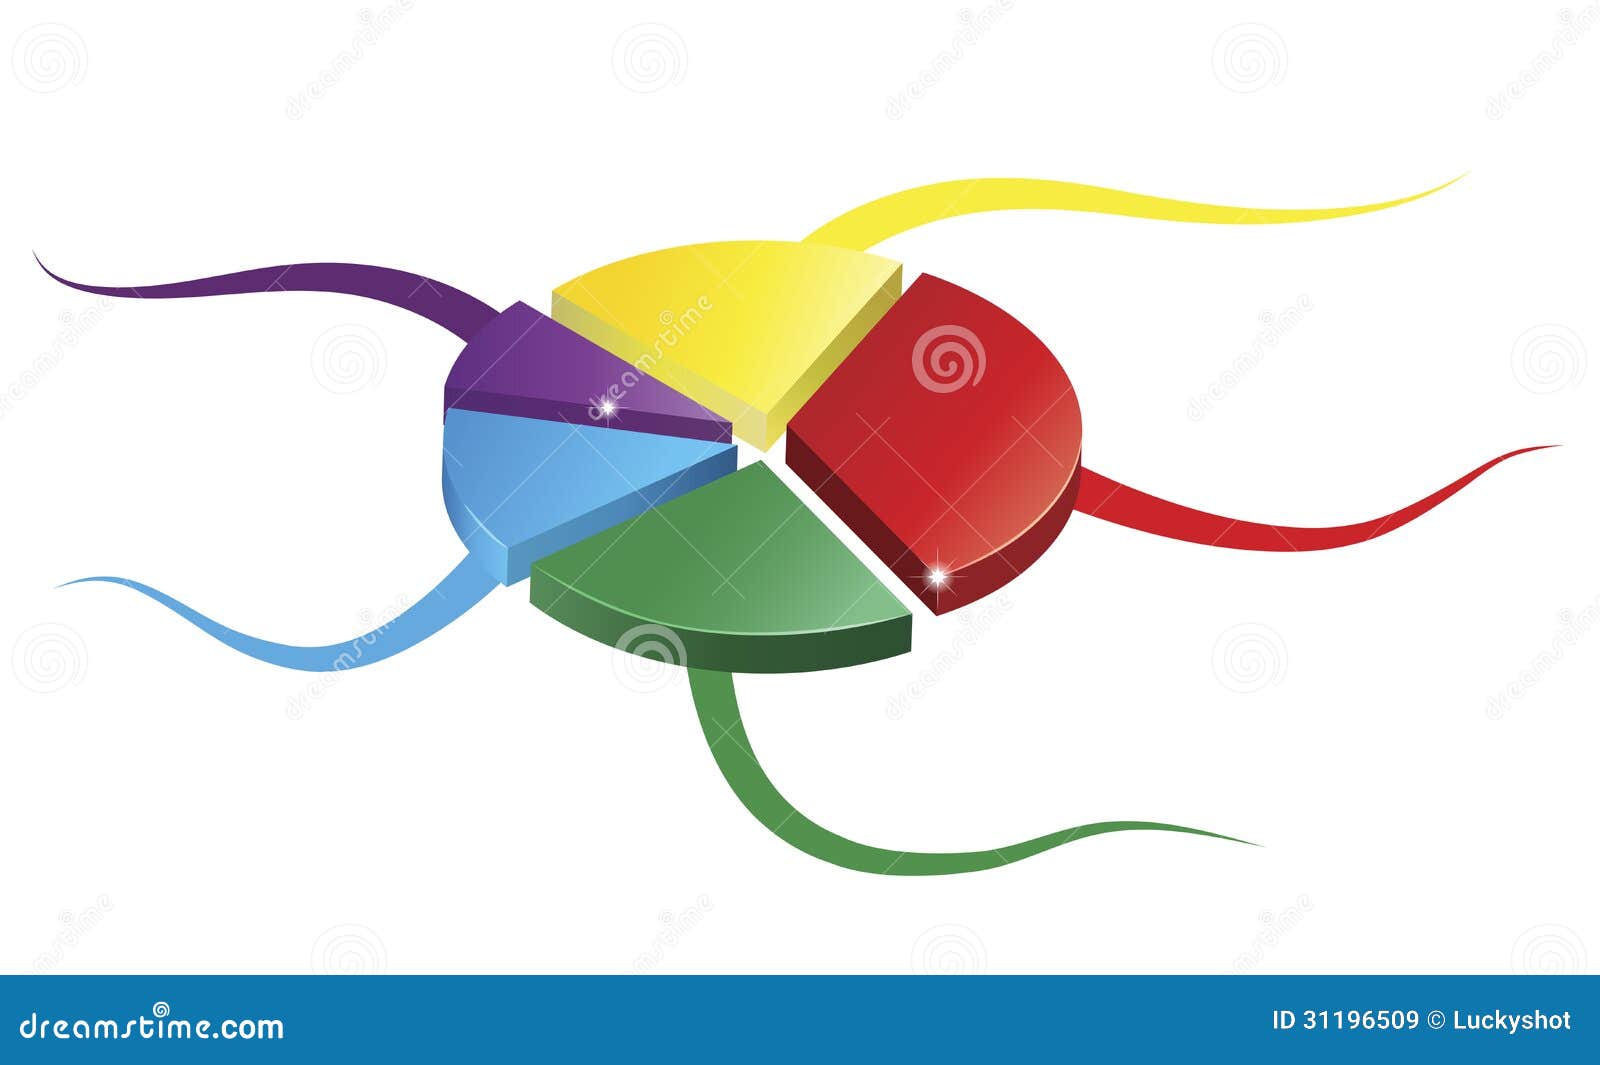 mind map clipart - photo #14